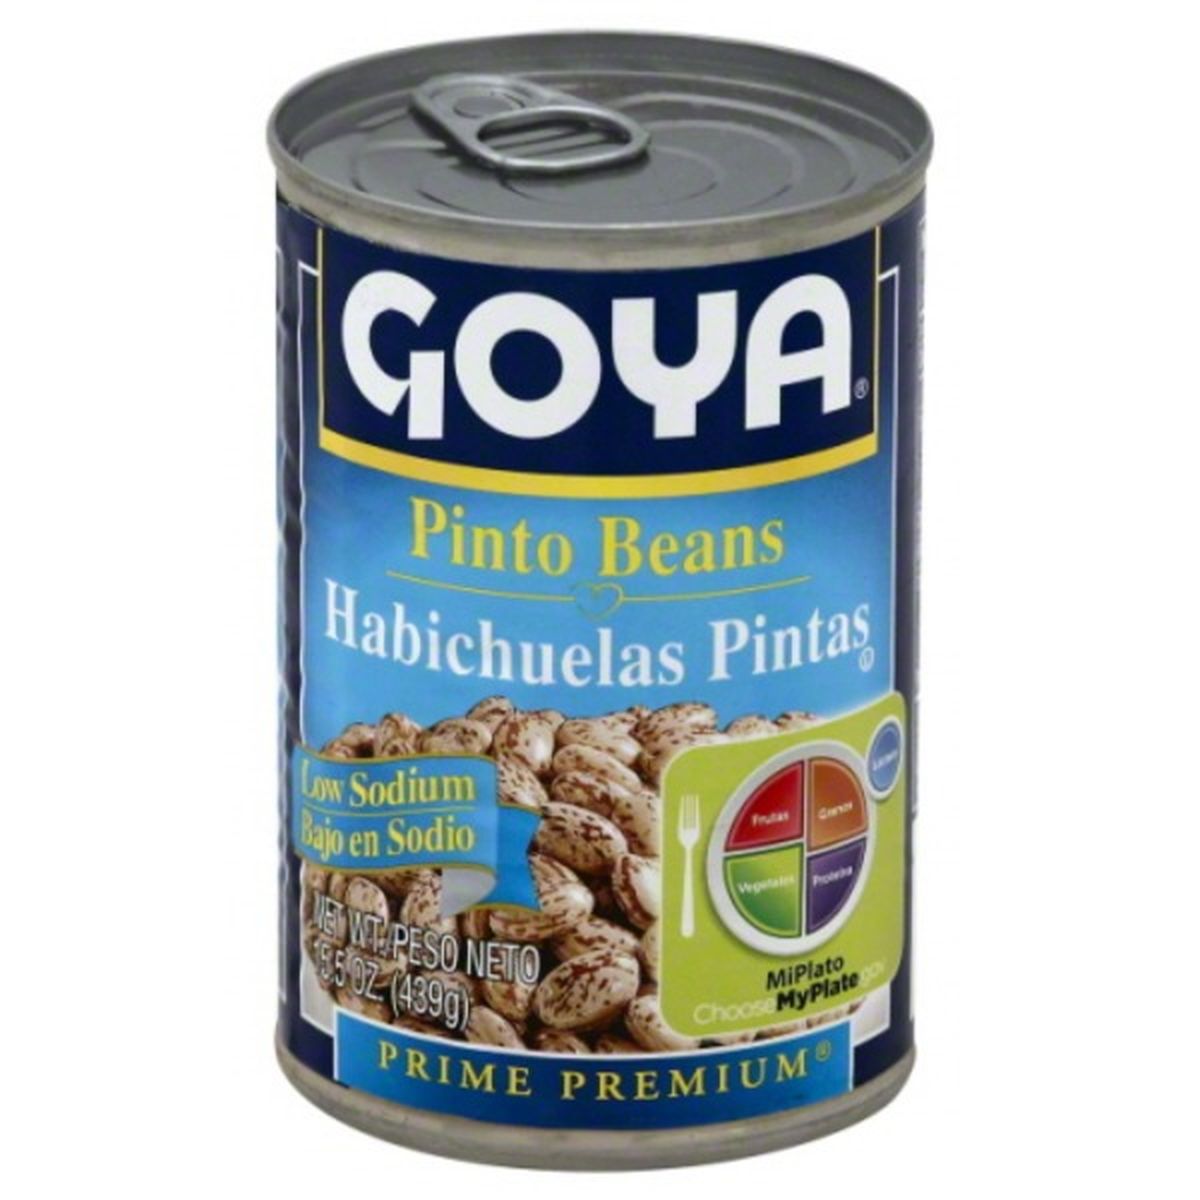 Calories in Goya Pinto Beans, Low Sodium